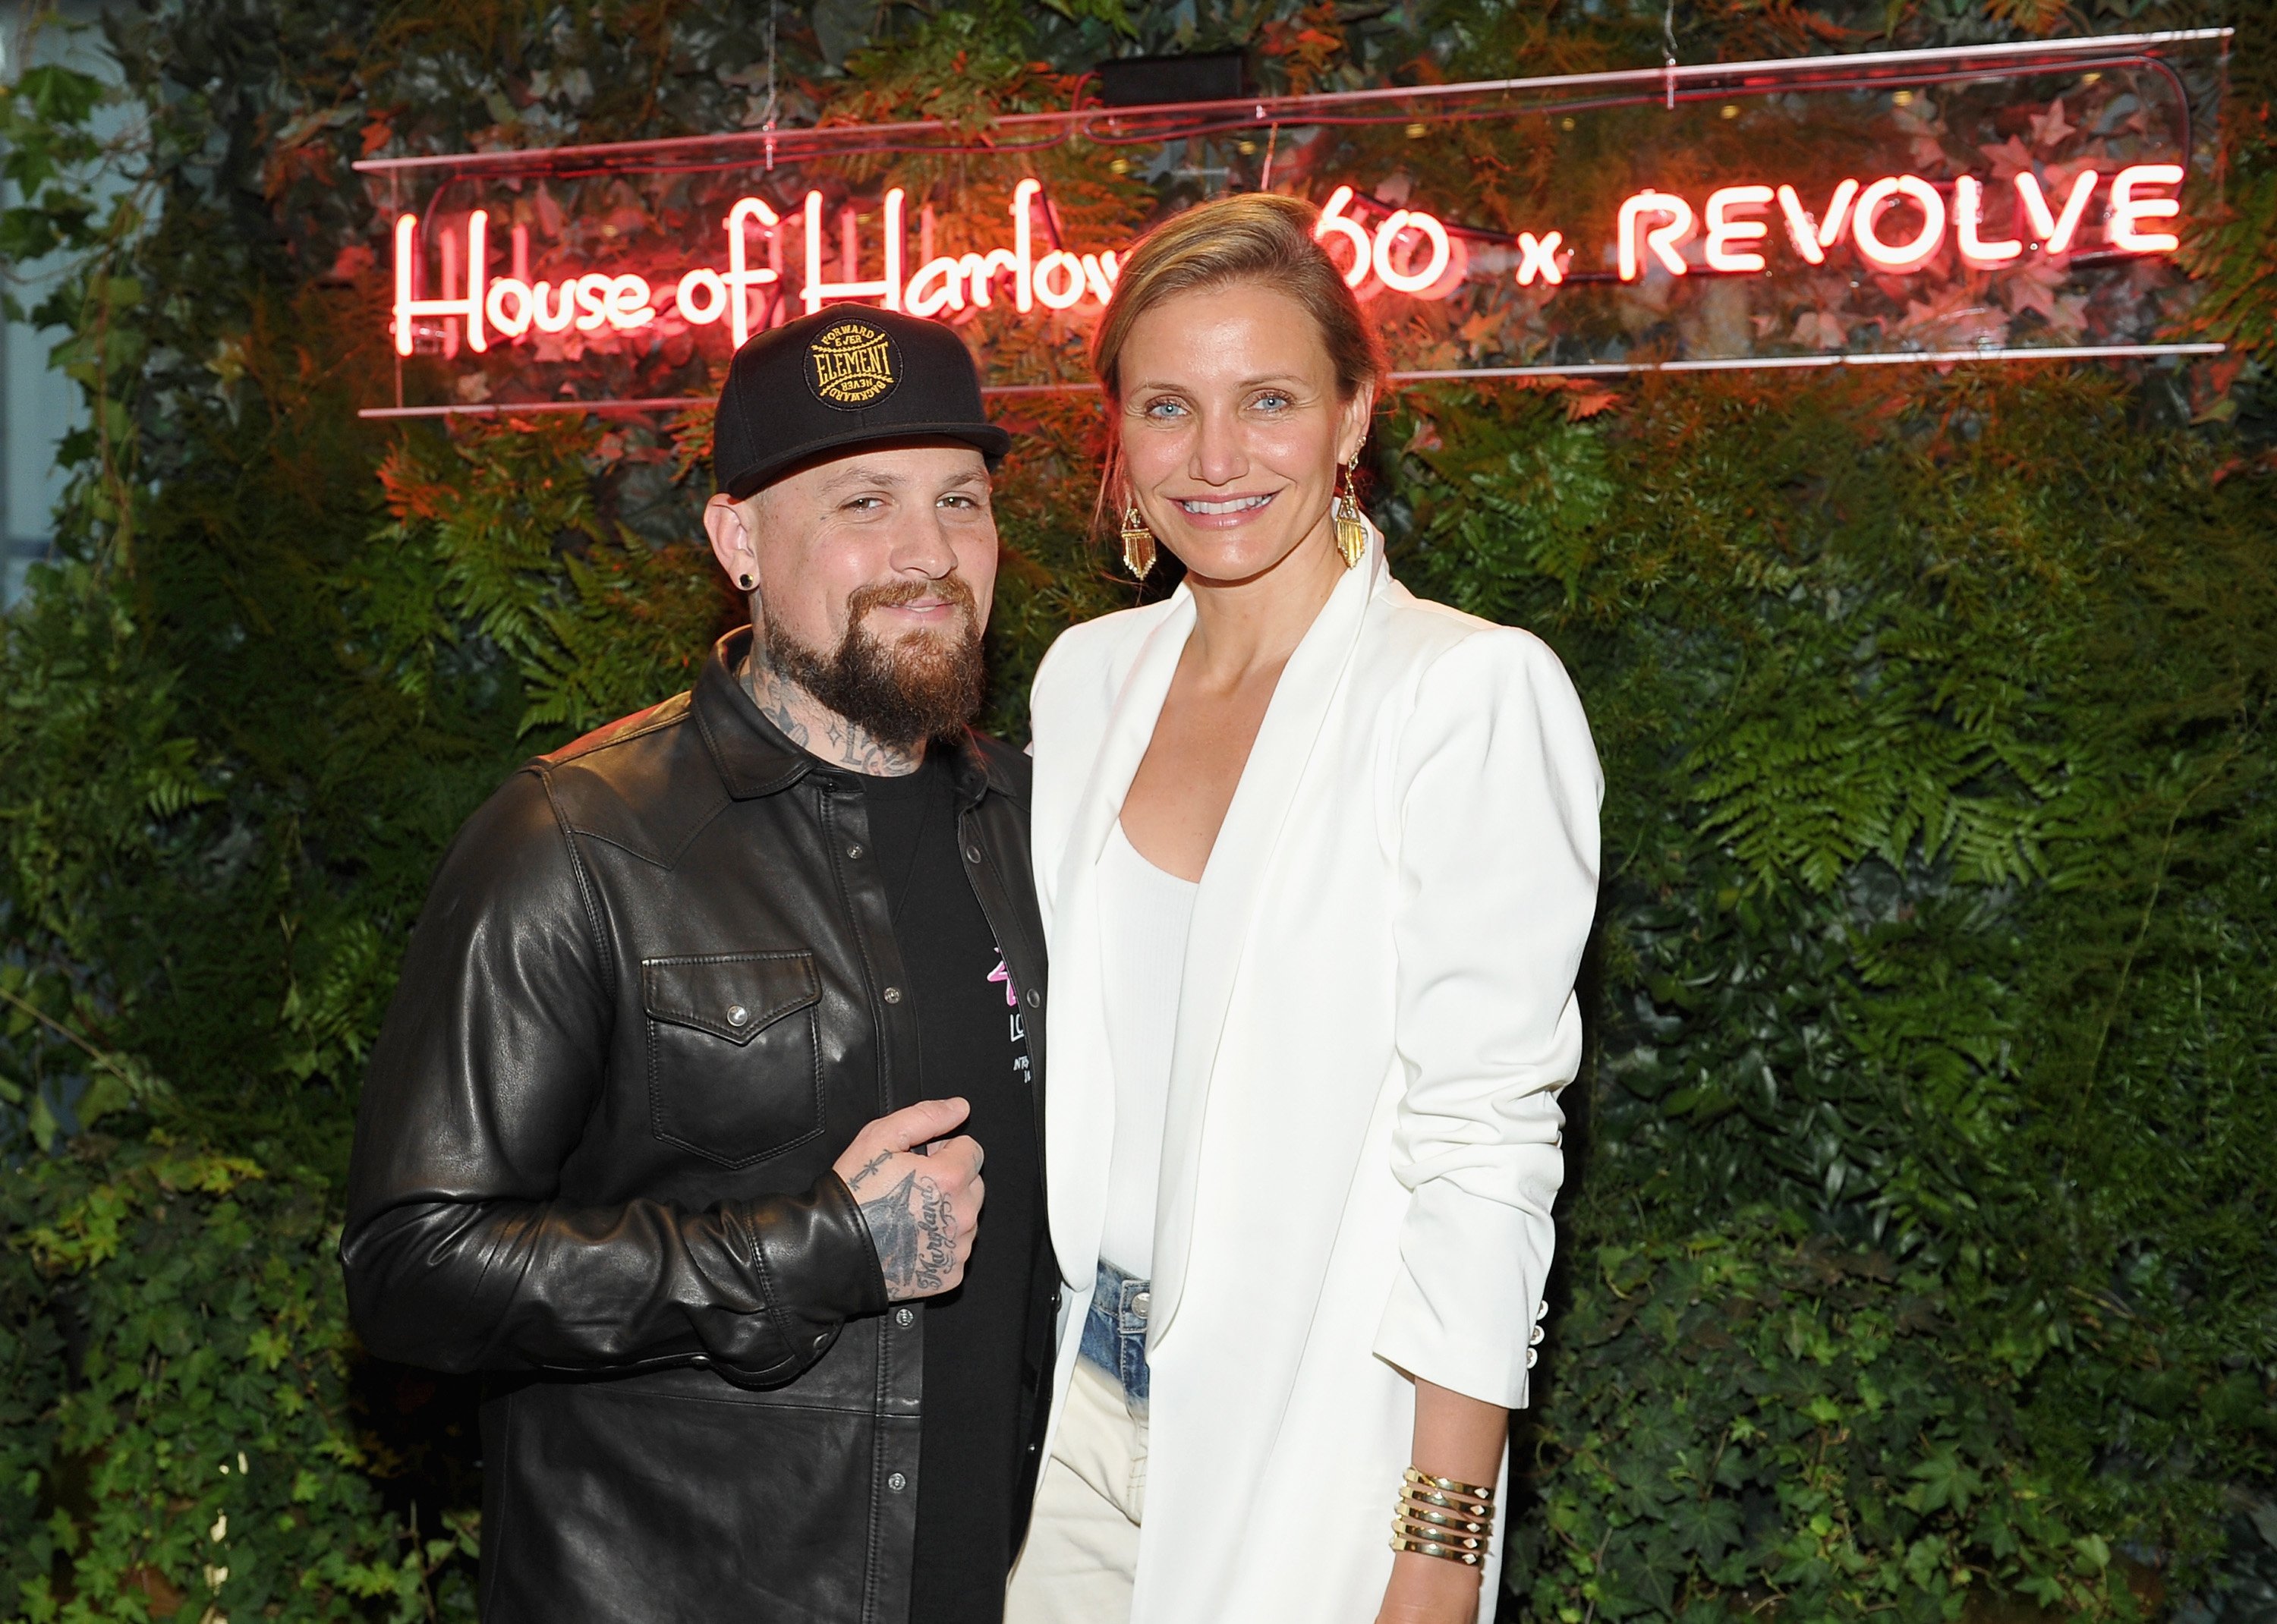 Benji Madden and Cameron Diaz attend House of Harlow 1960 x REVOLVE on June 2, 2016, in Los Angeles, California | Photo: Getty Images.